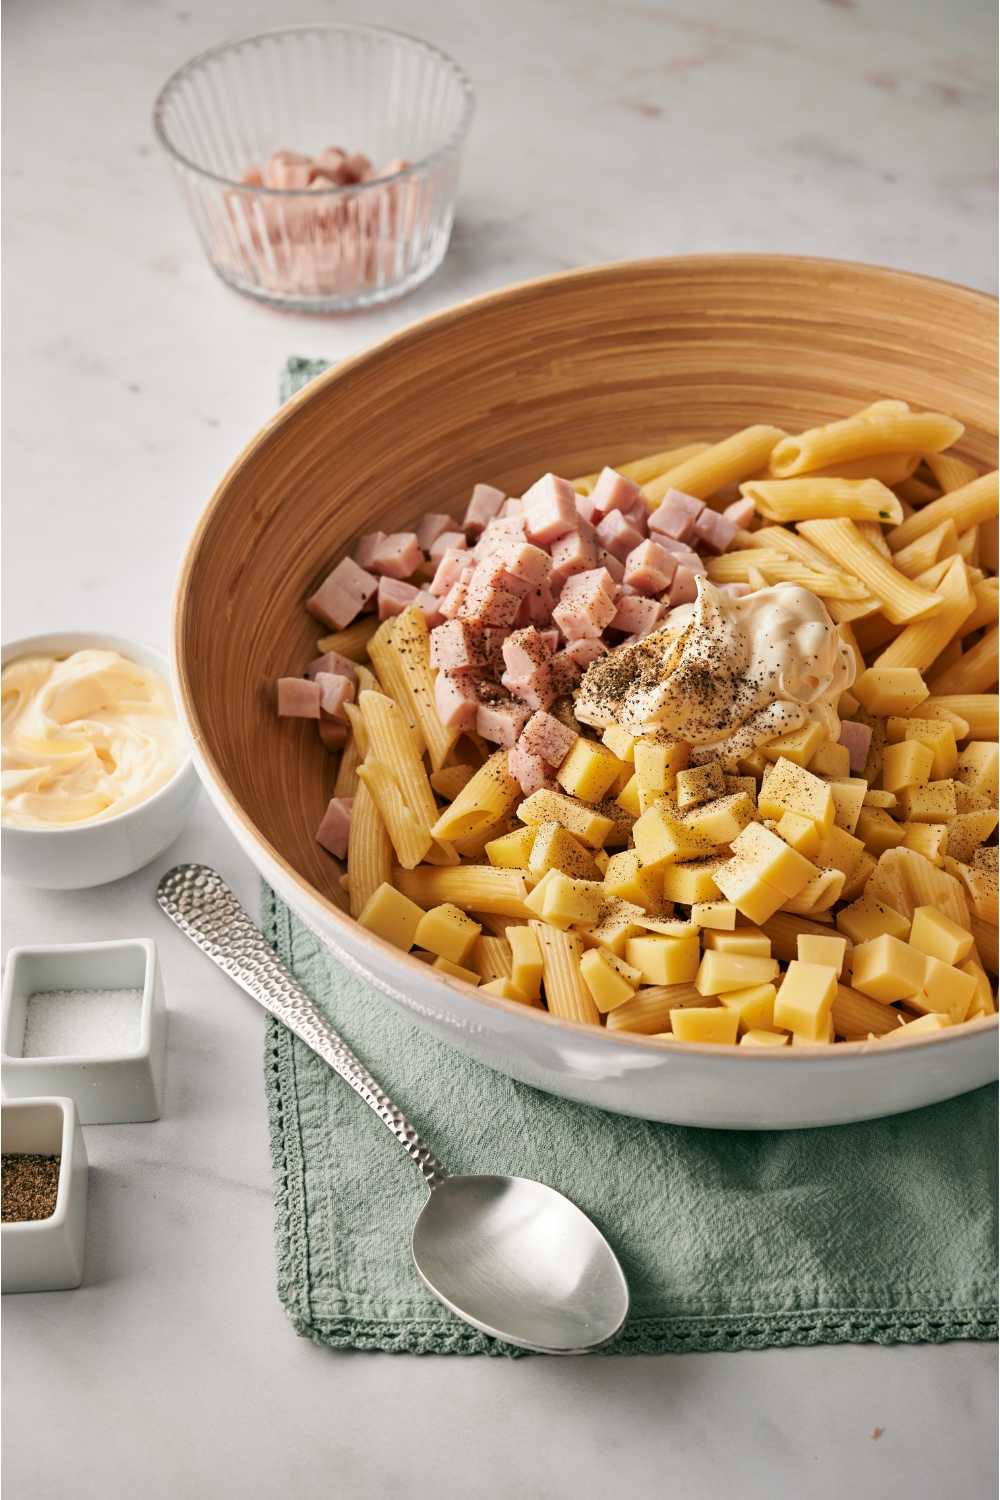 A brown and white bowl with cooked penne pasta, cubed ham, cubed cheese, mayonnaise, and pepper in it, next to a spoon and smaller bowls of mayo and cubed ham.